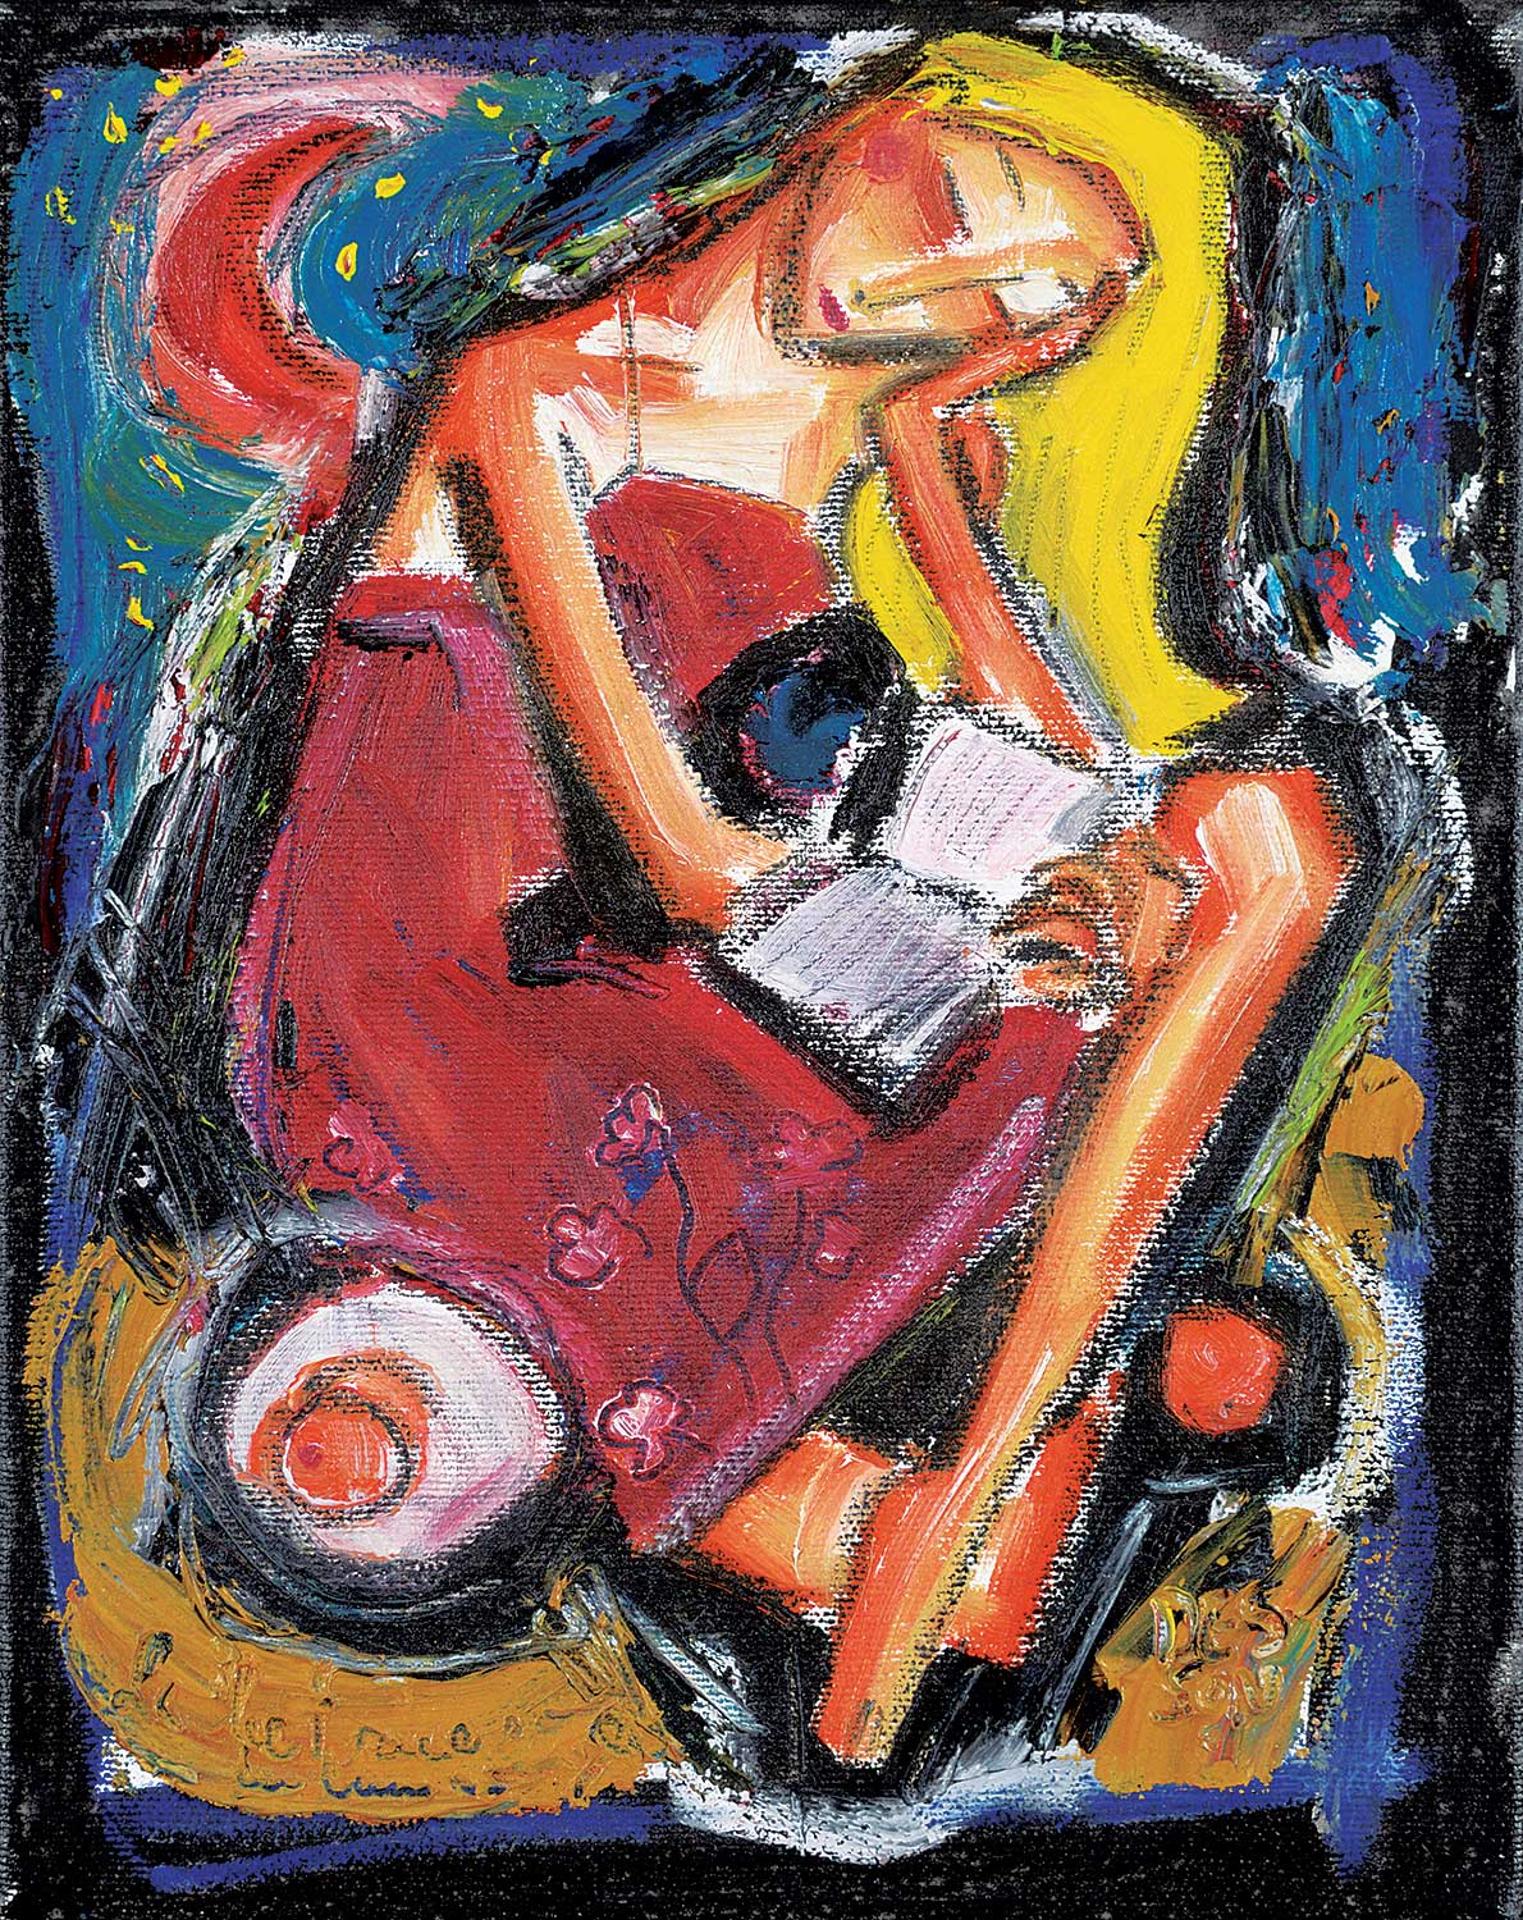 Denis Chiasson (1968) - Untitled - Blonde Woman Reading a Book